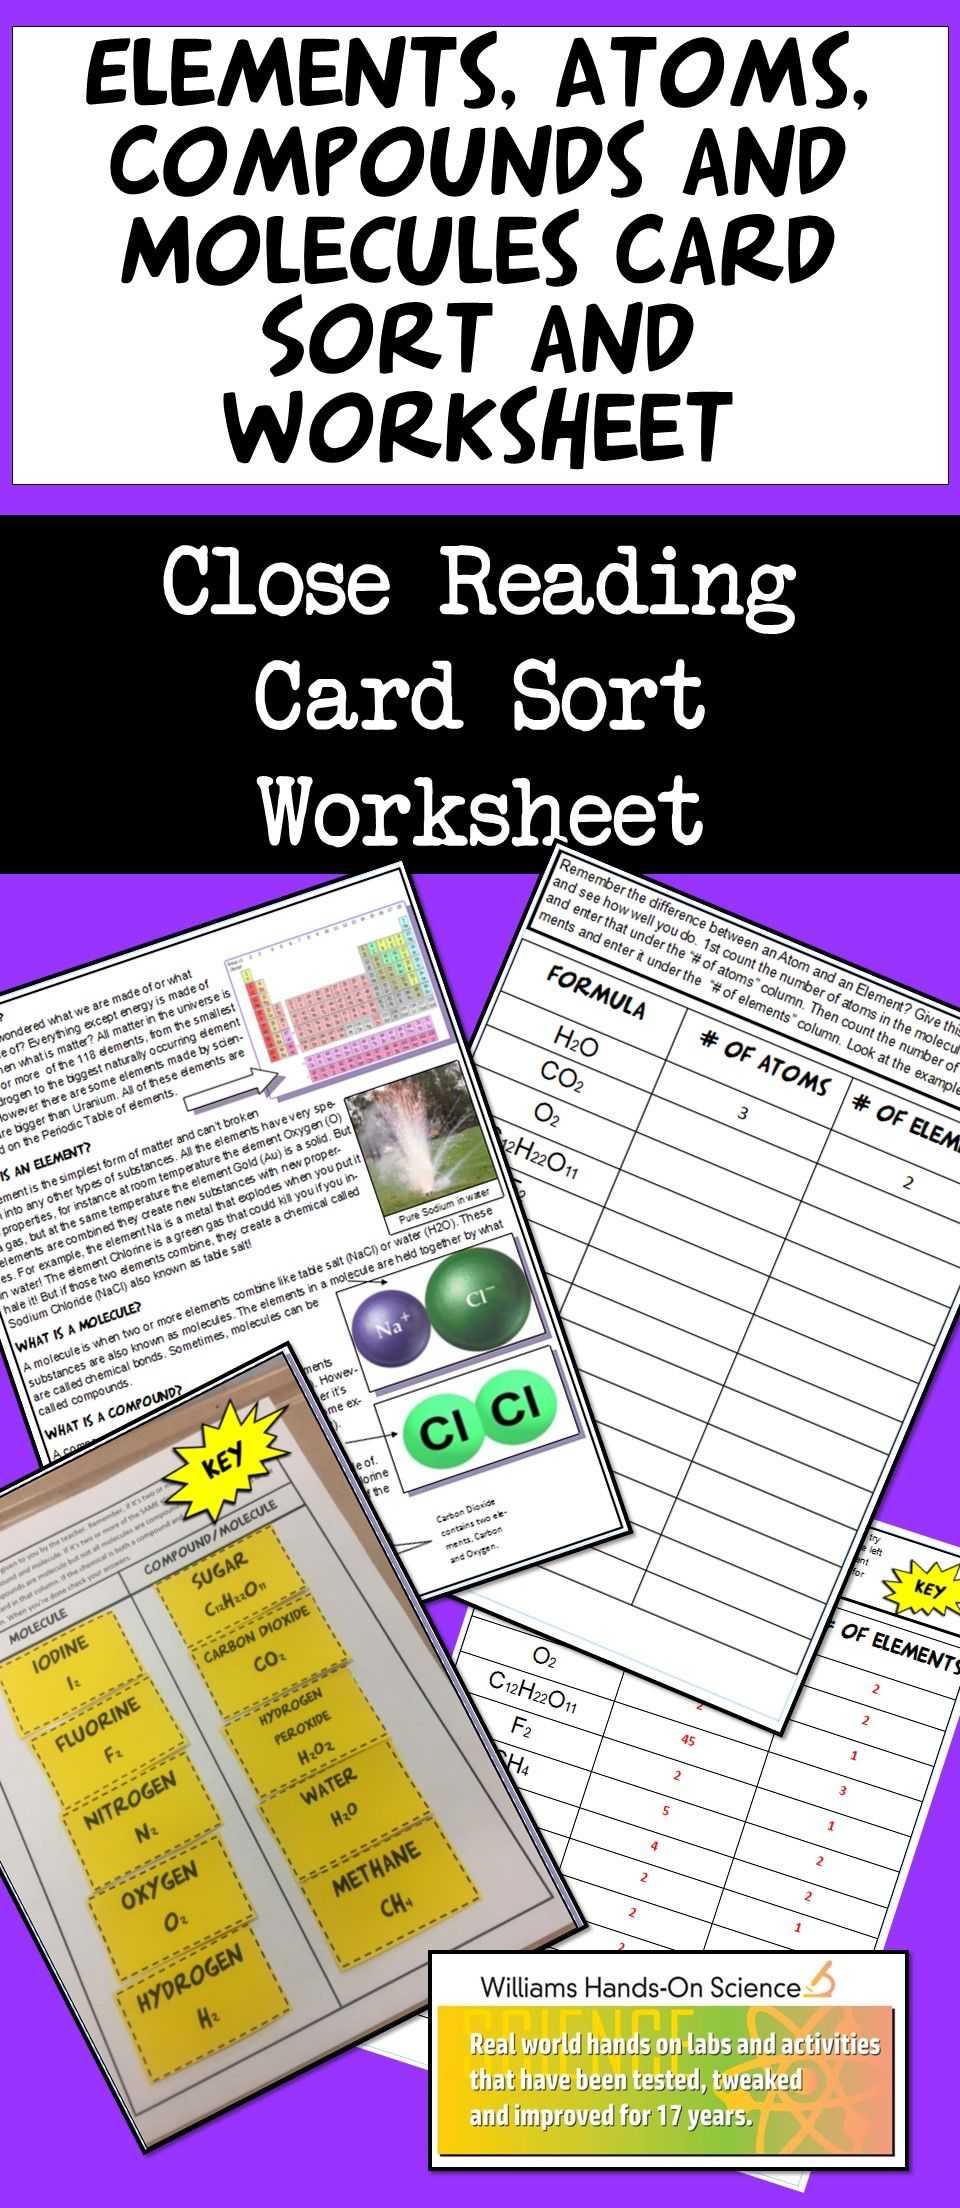 Ap Chemistry Photoelectron Spectroscopy Worksheet as Well as Elements atoms Pounds and Molecules Card sort Worksheet and